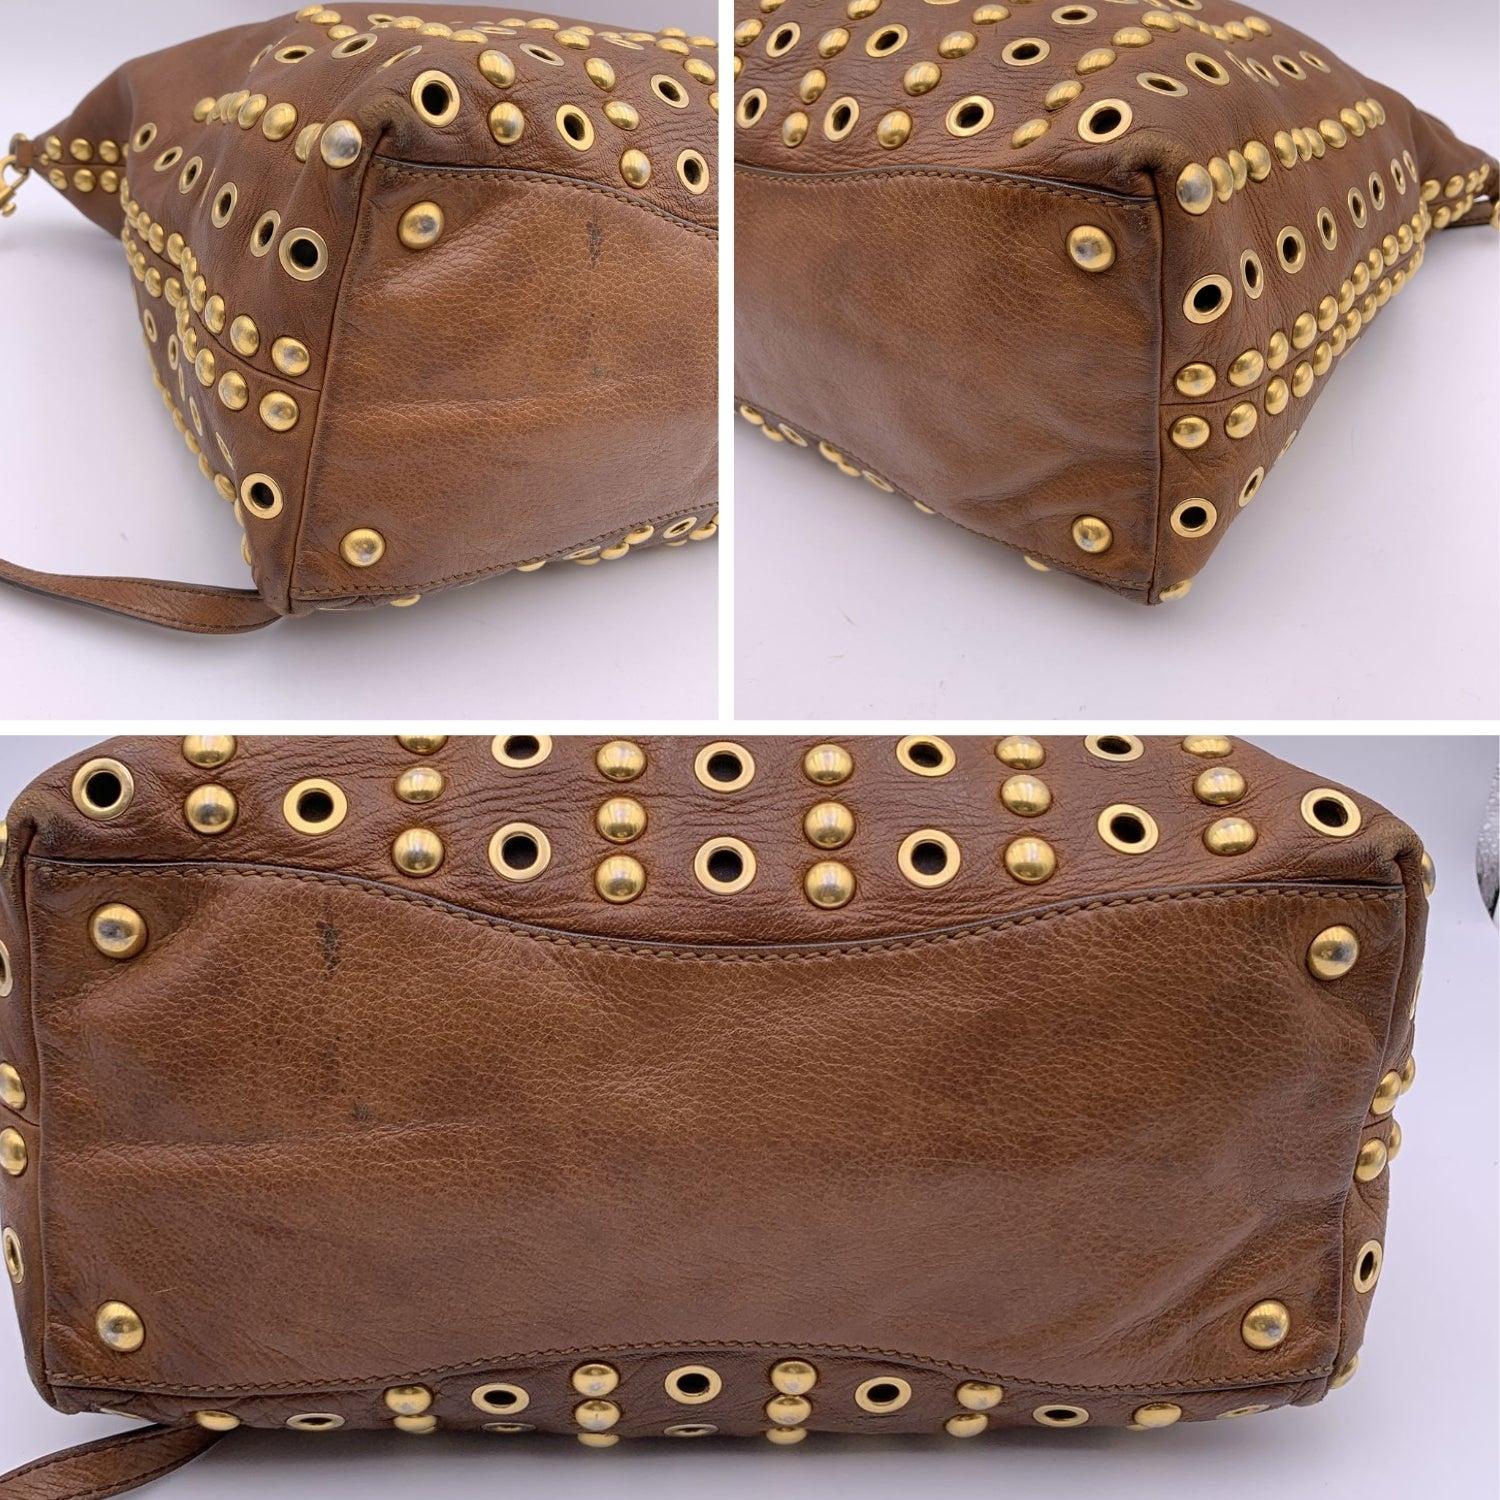 Miu Miu Brown Leather Studded Tote Bag with Shoulder Strap 4